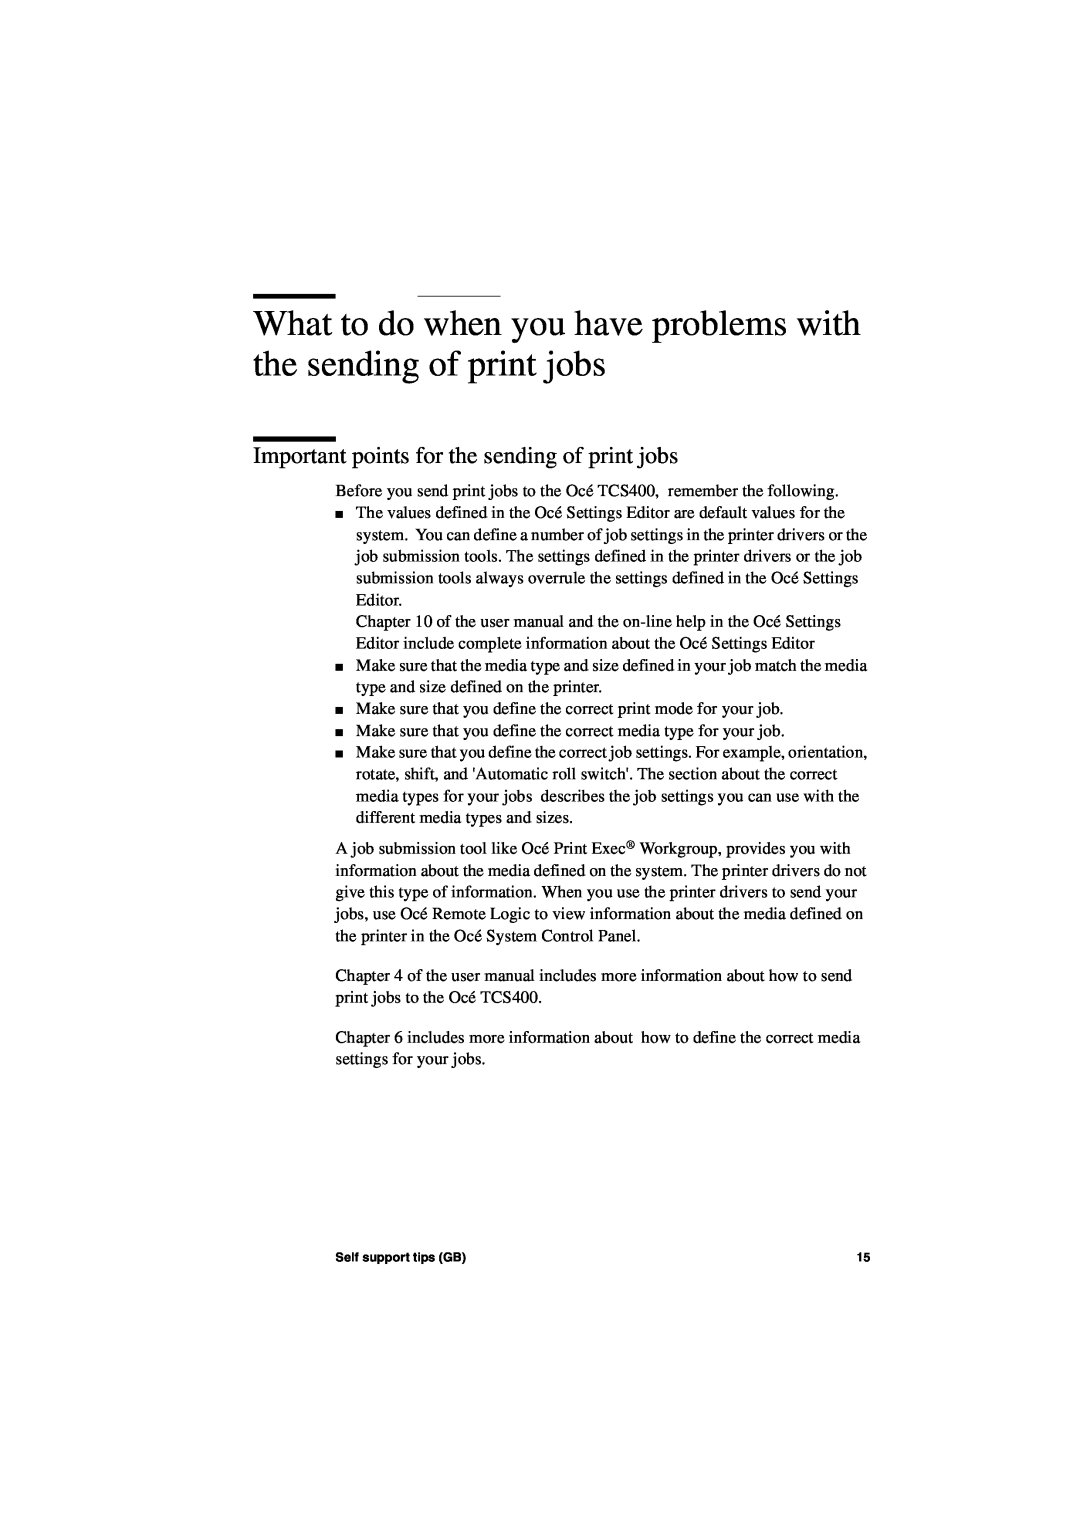 Oce North America TCS400 manual What to do when you have problems with the sending of print jobs 